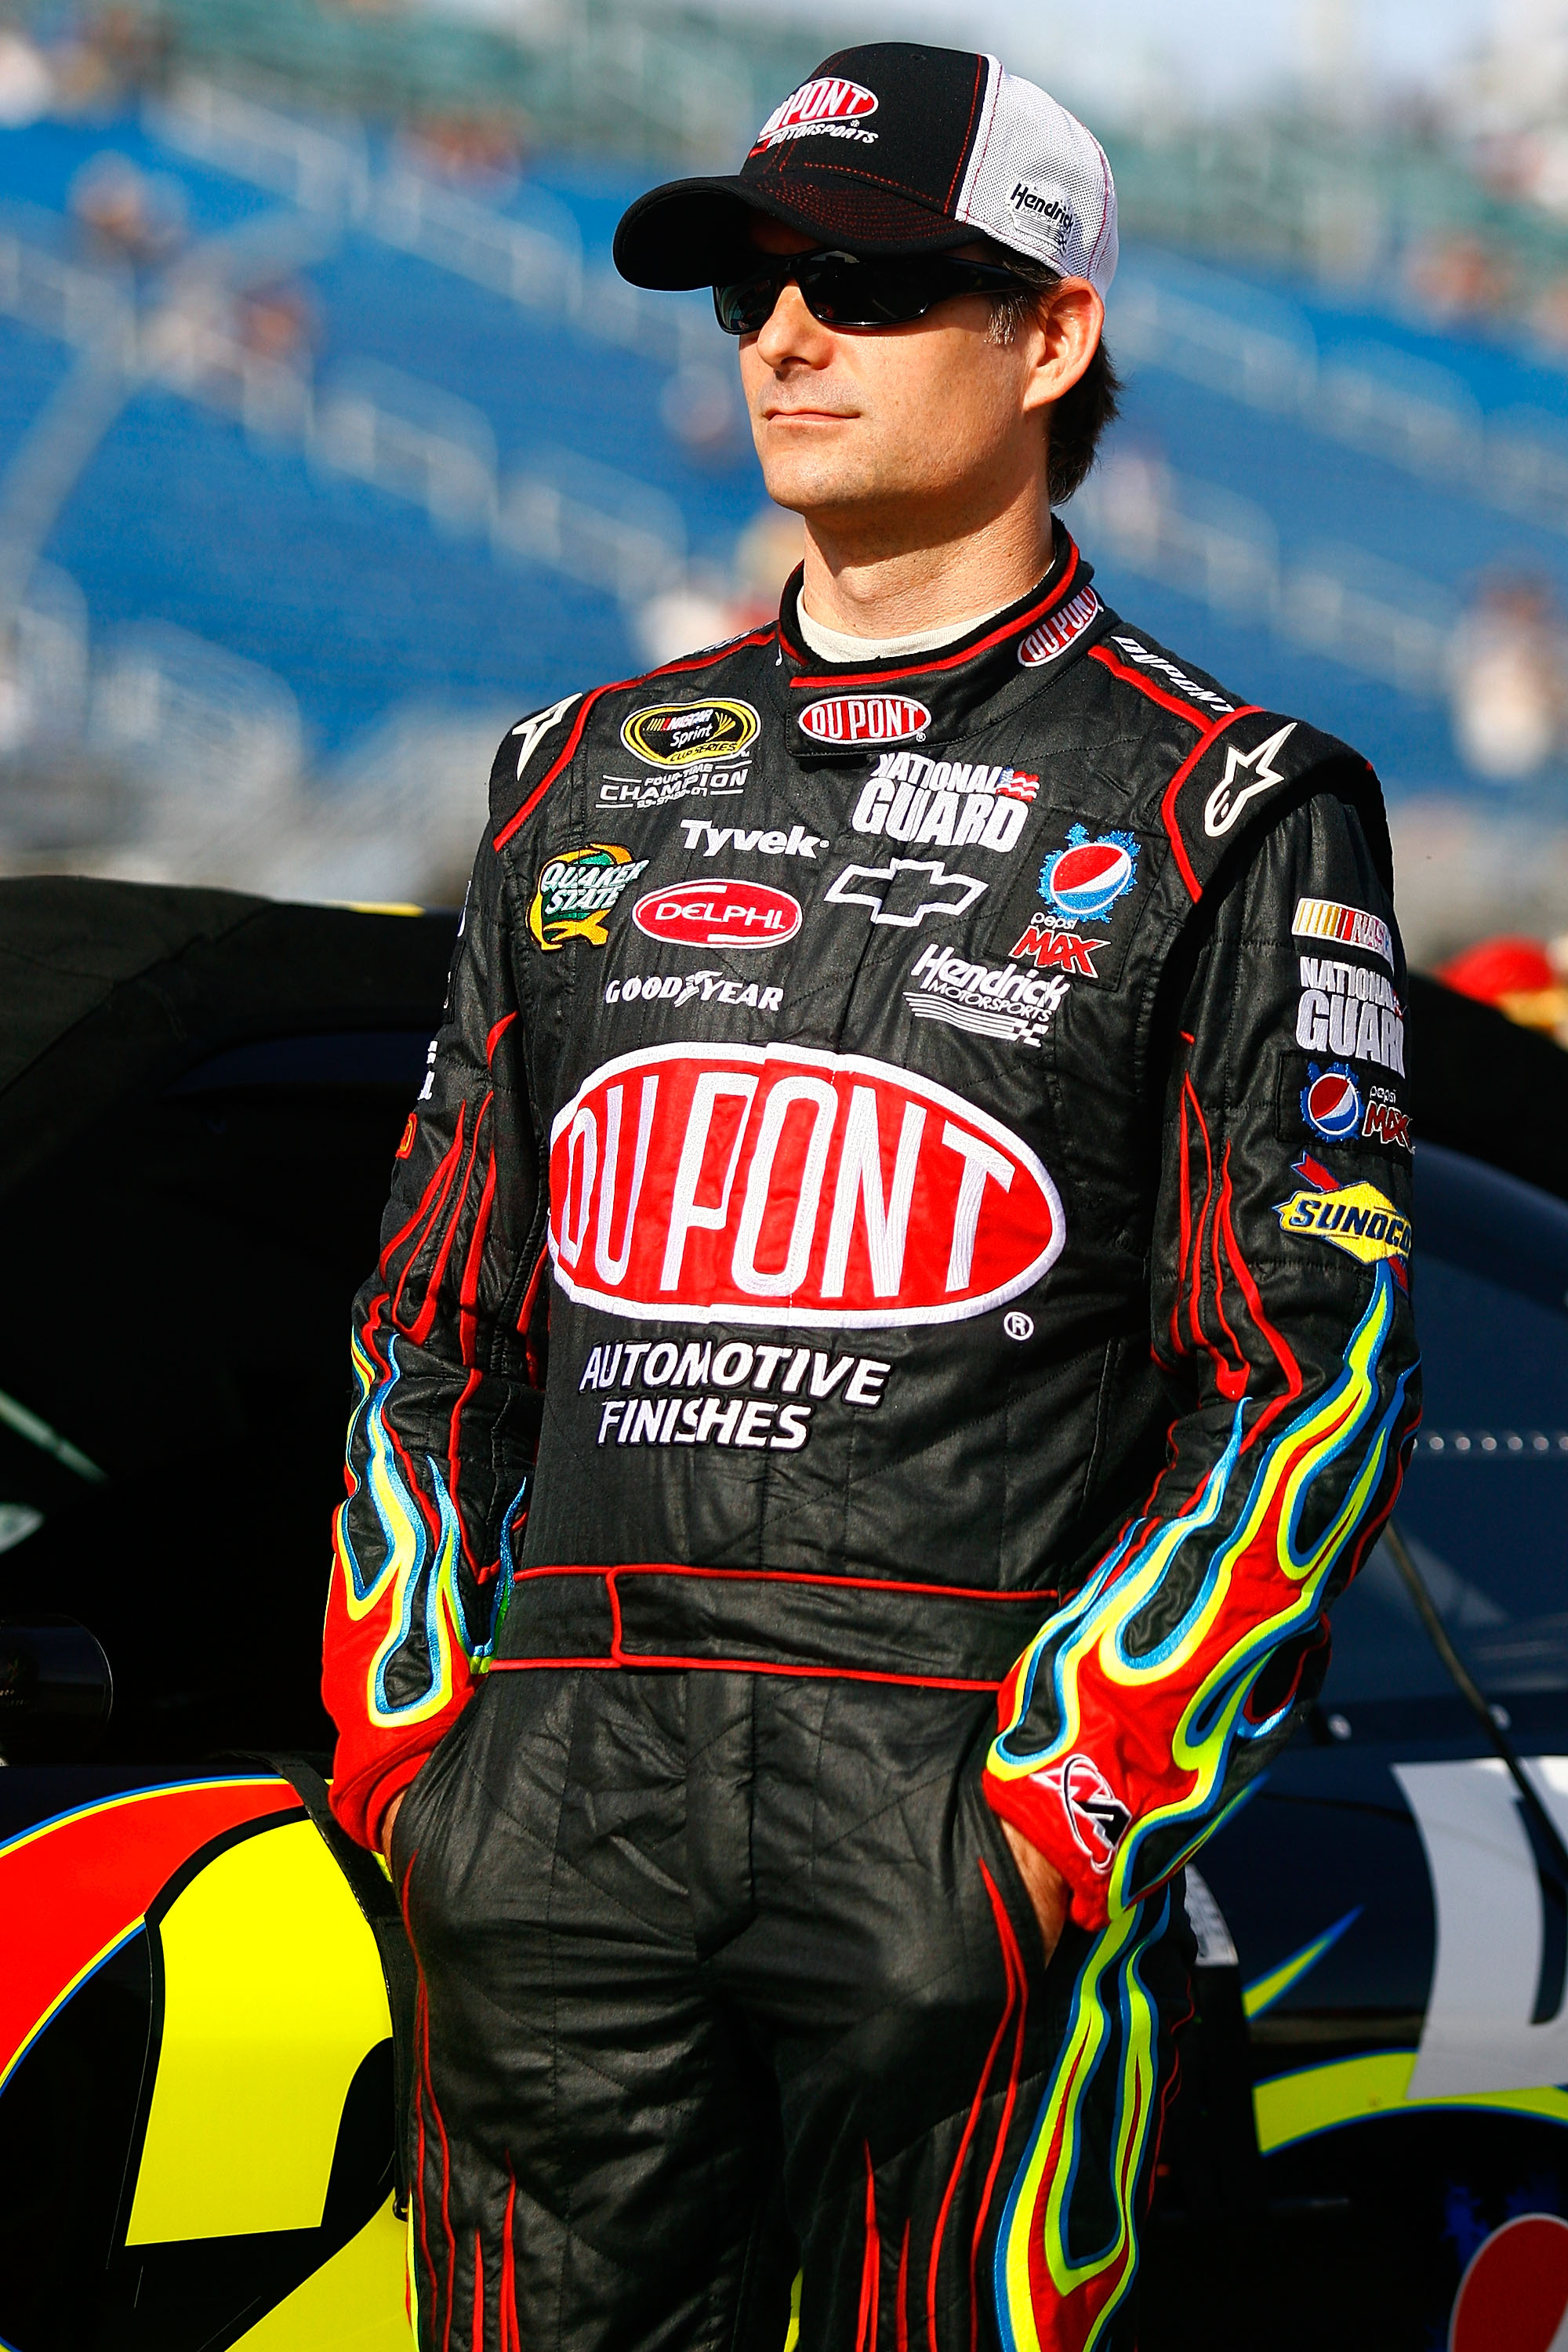 HOMESTEAD, FL - NOVEMBER 19:  Jeff Gordon, driver of the #24 DuPont Chevrolet, stands in the grid during qualifying for the NASCAR Sprint Cup Series Ford 400 at Homestead-Miami Speedway on November 19, 2010 in Homestead, Florida.  (Photo by Jason Smith/Ge